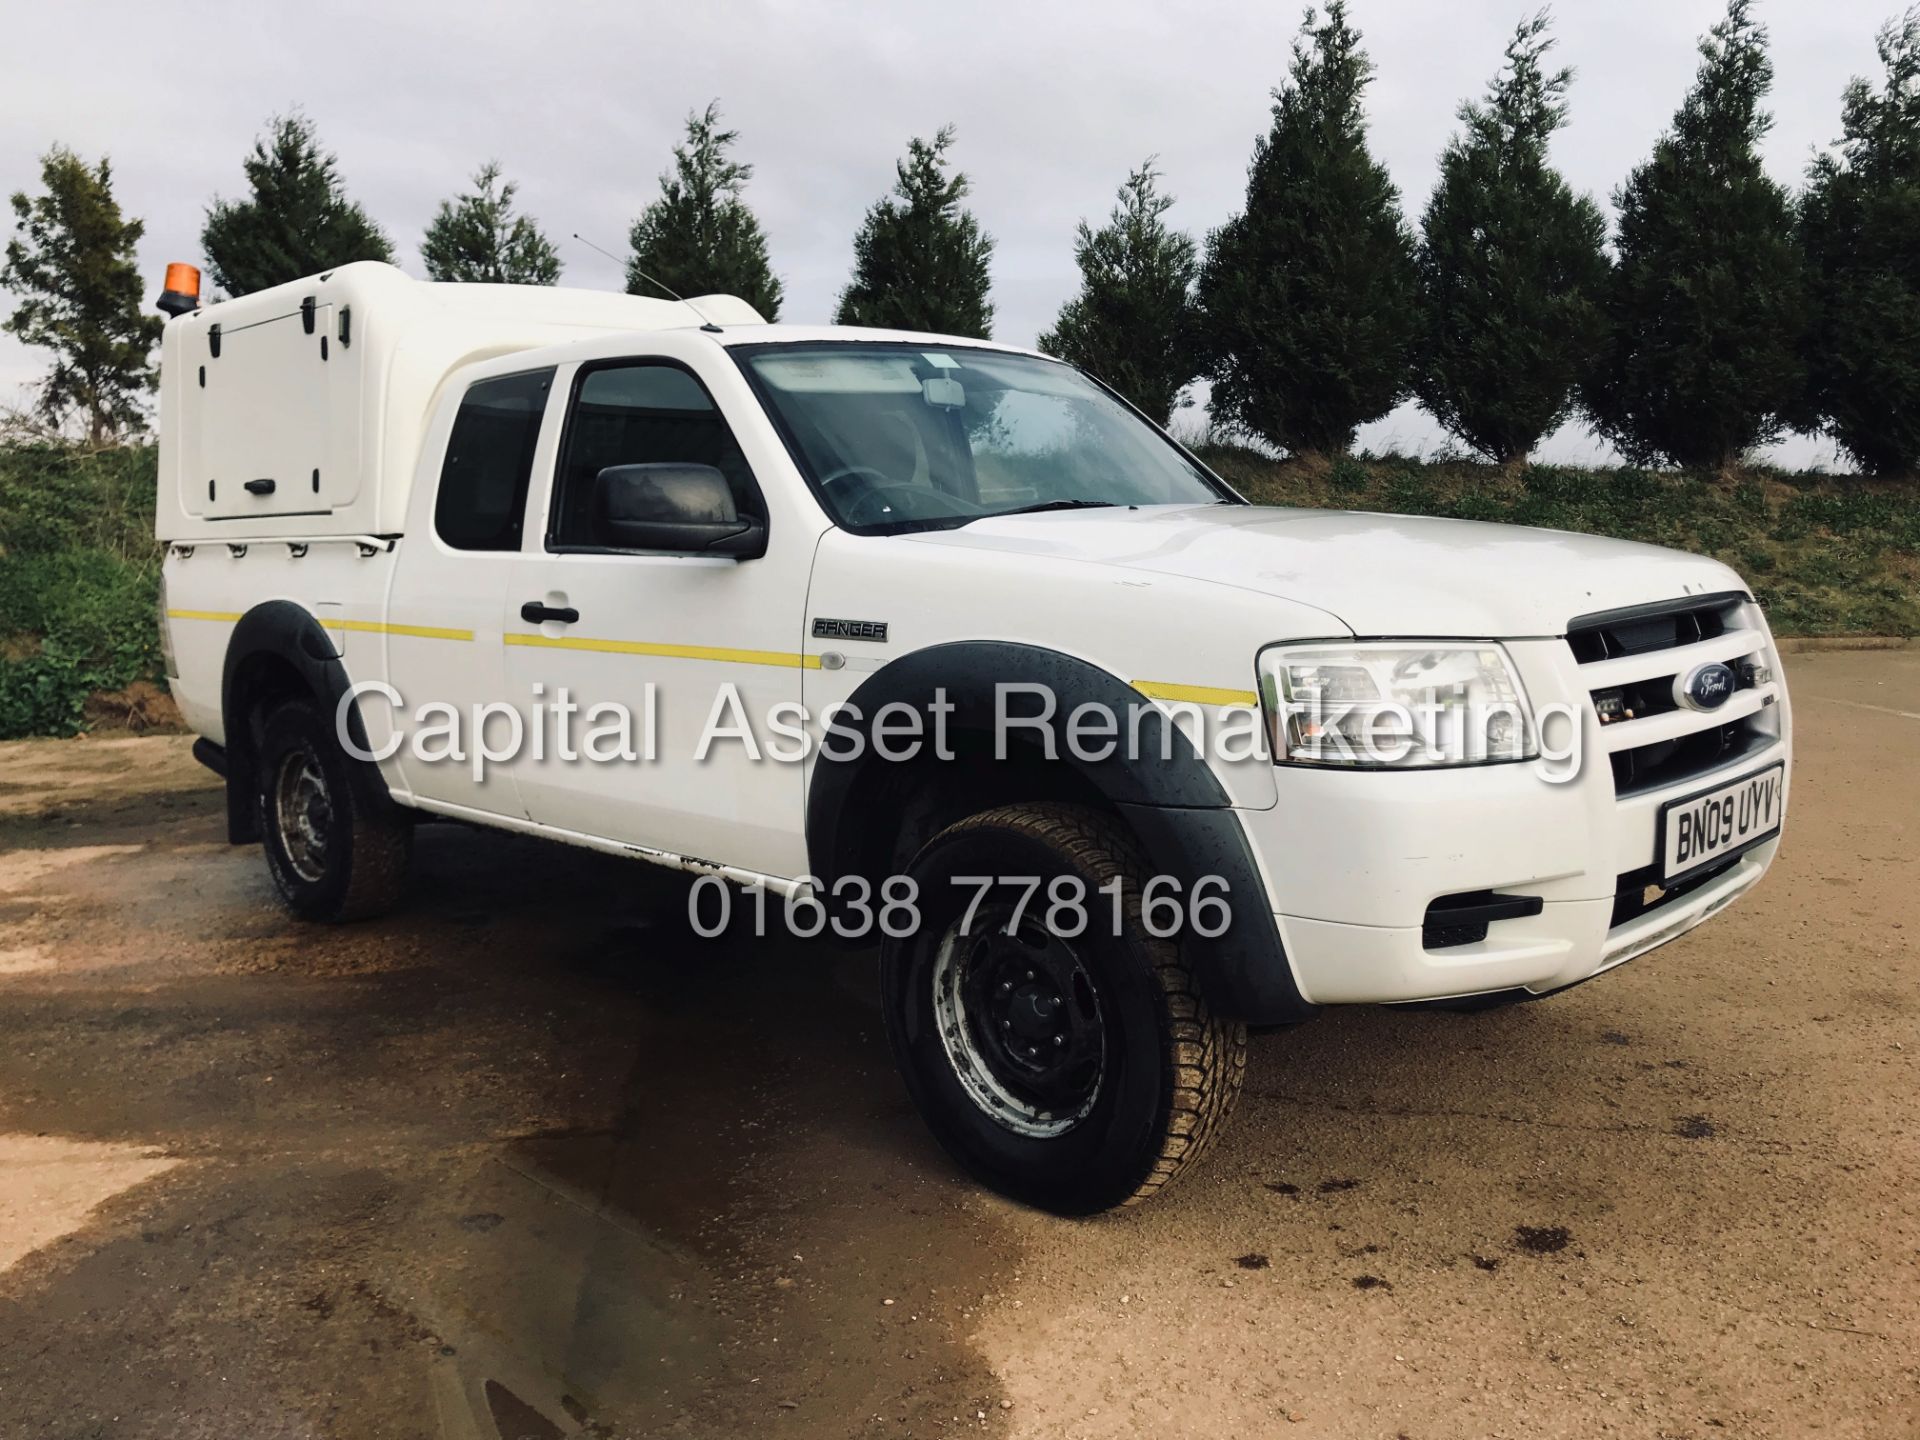 FORD RANGER 2.5TD "SPACE / CLUB CAB" 4X4 PICK-UP (09 REG) 1 OWNER - SPECIALIST VEHICLE *RARE* - Image 2 of 24